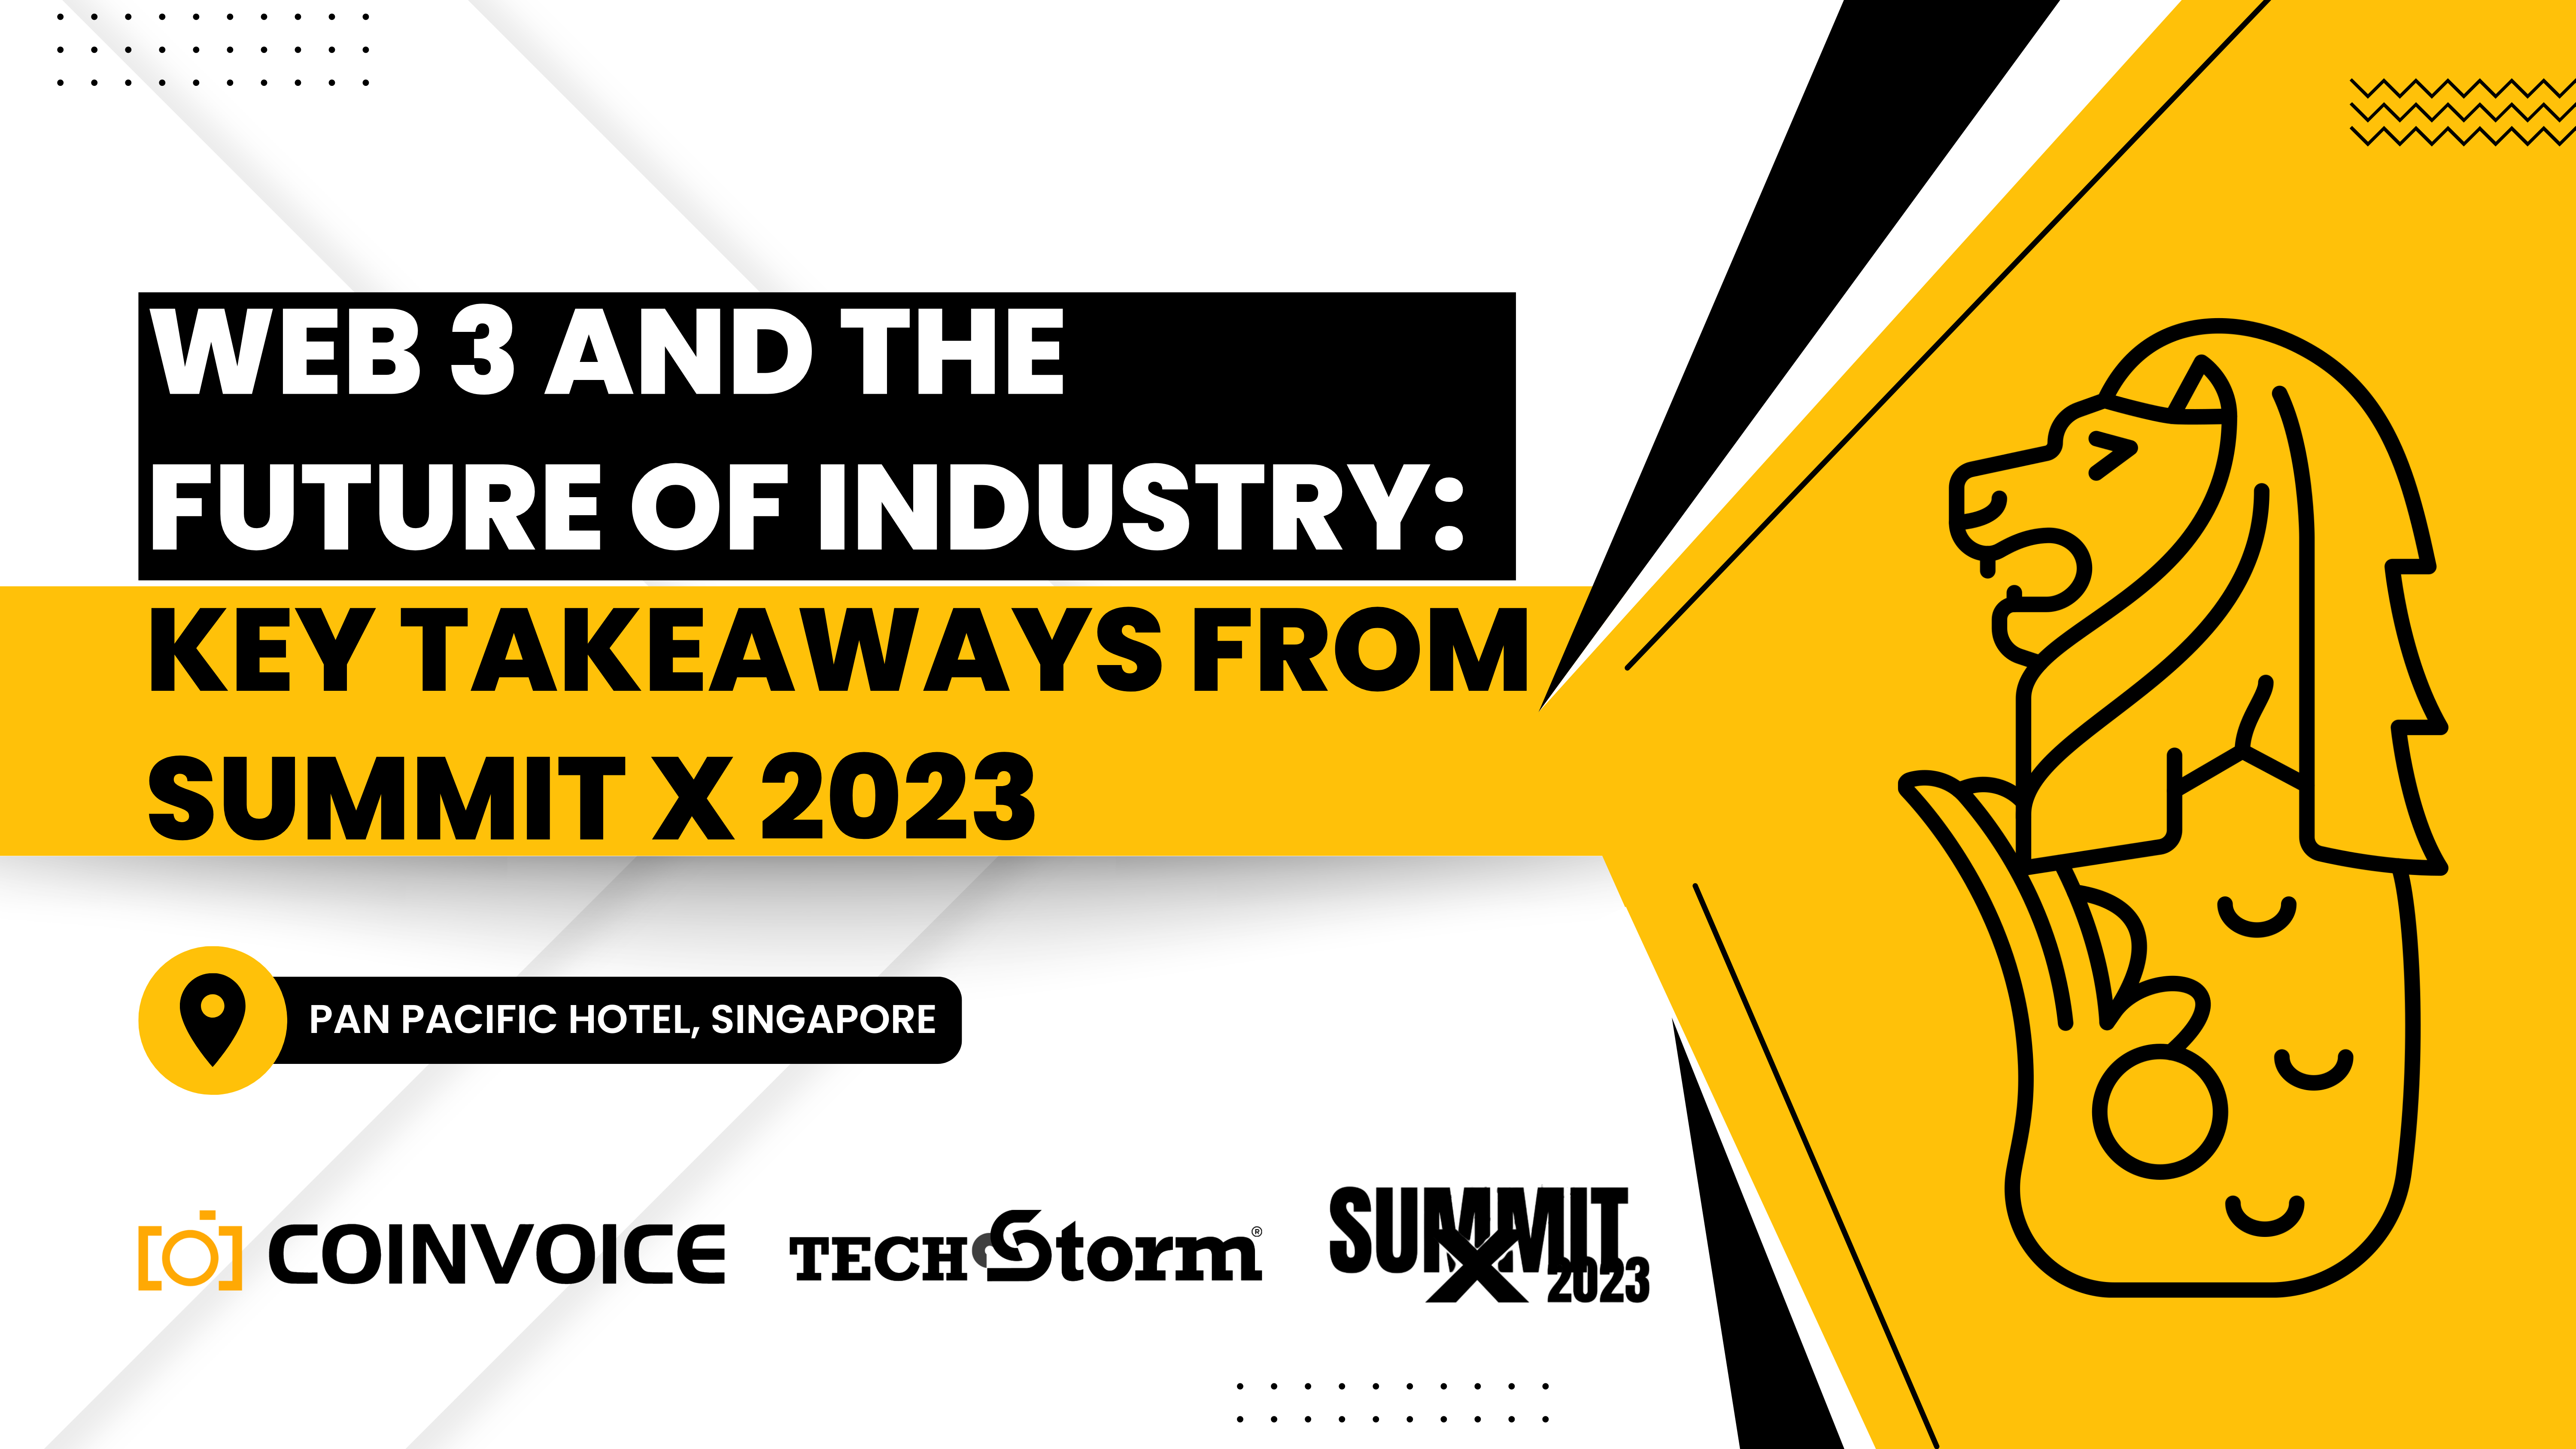 Web 3 and the Future of Industry: Key Takeaways From SUMMIT X  2023